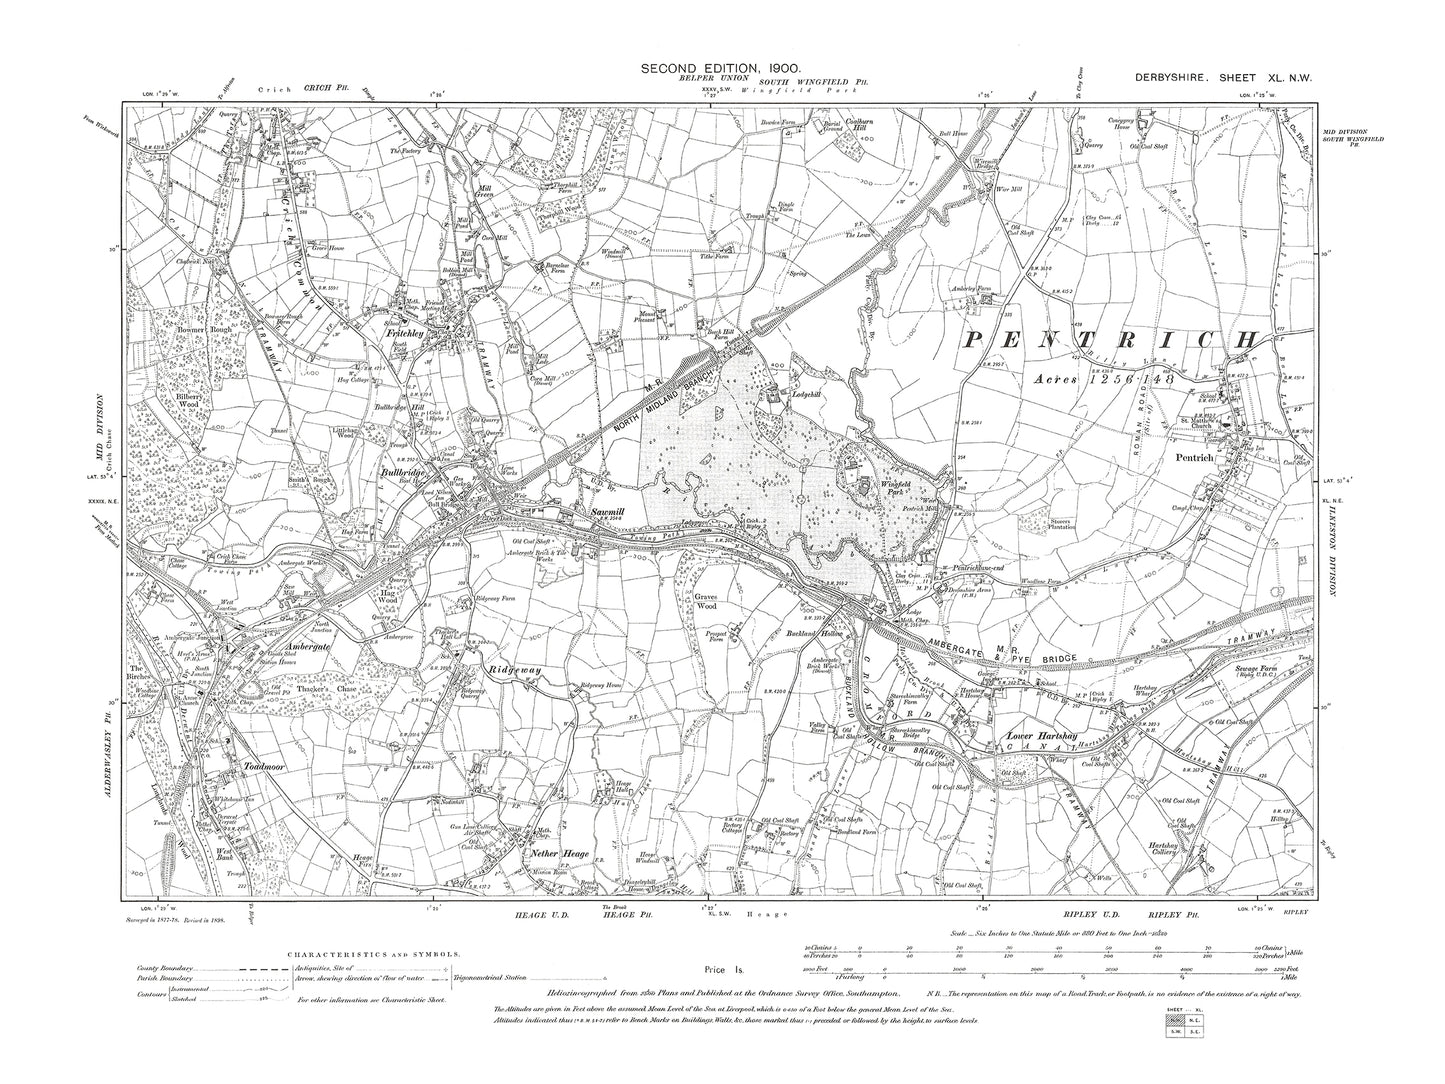 Old OS map dated 1900, showing Nether Heage, Pentrich in Derbyshire 40NW